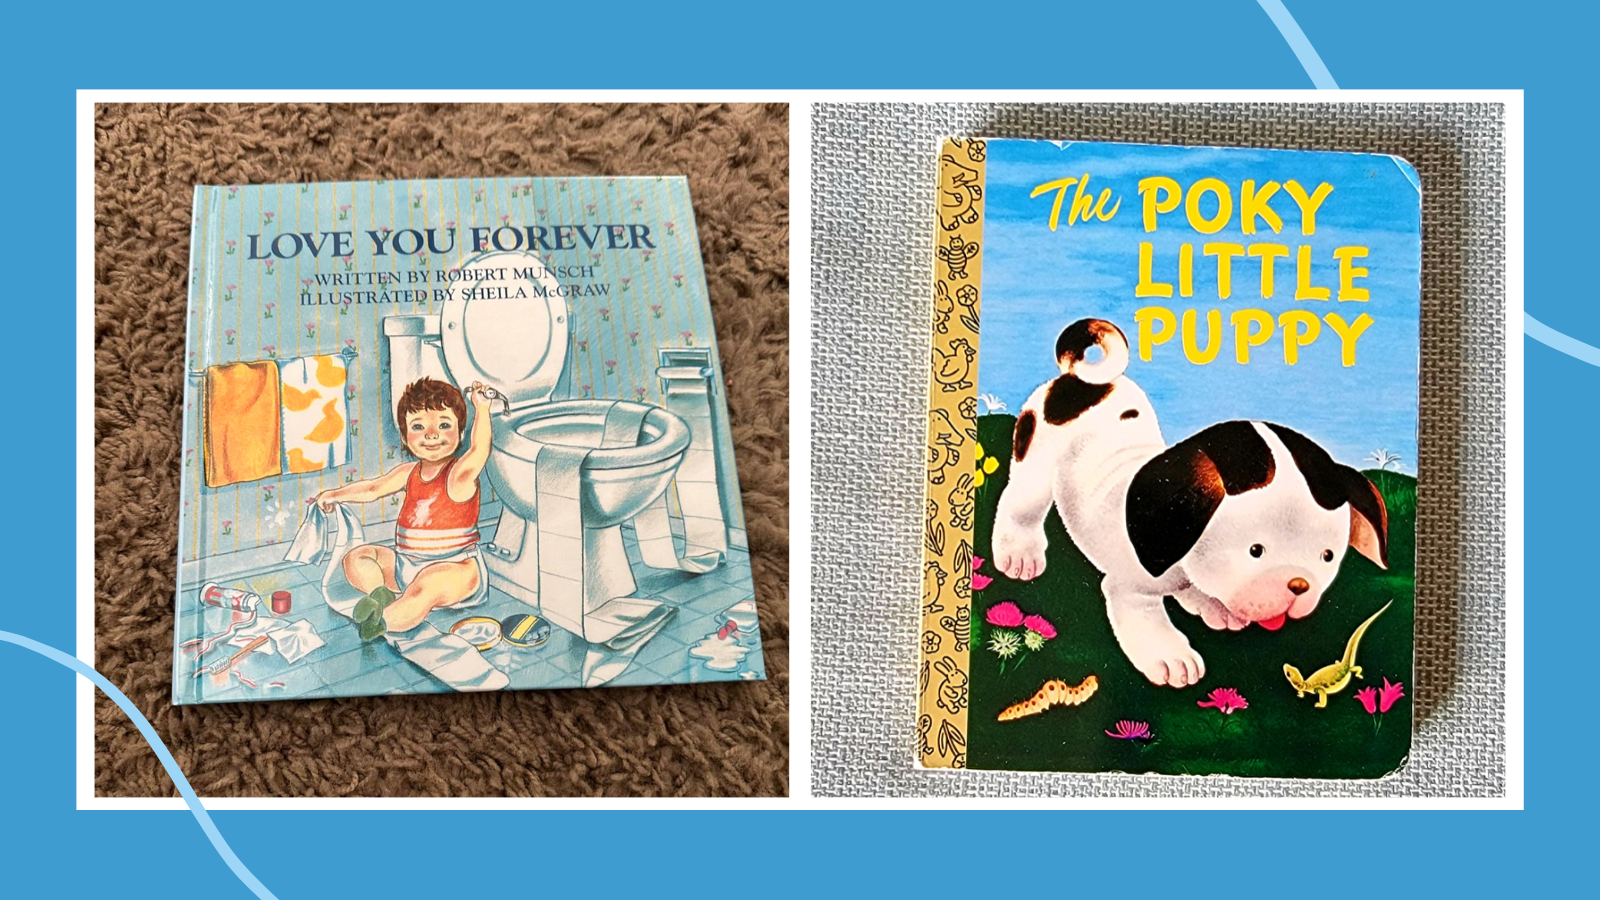 I'll Love You Forever book on brown rug and The Pokey Little Puppy book on table.